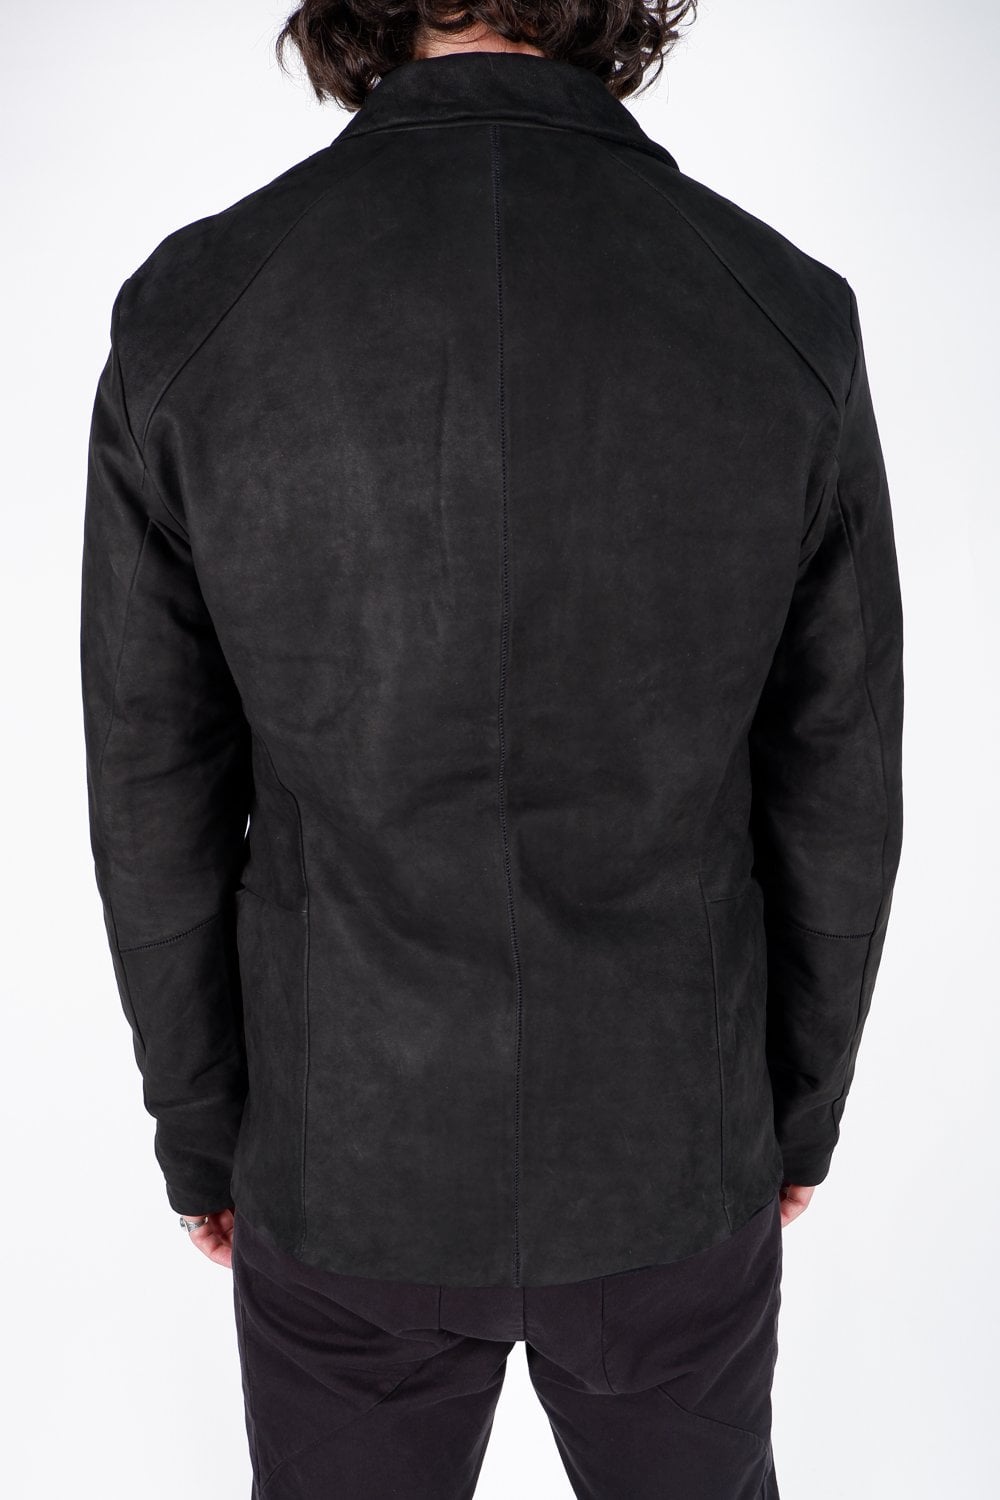 Buy the Transit Wool Interior Leather Jacket Black at Intro. Spend £50 for free UK delivery. Official stockists. We ship worldwide.